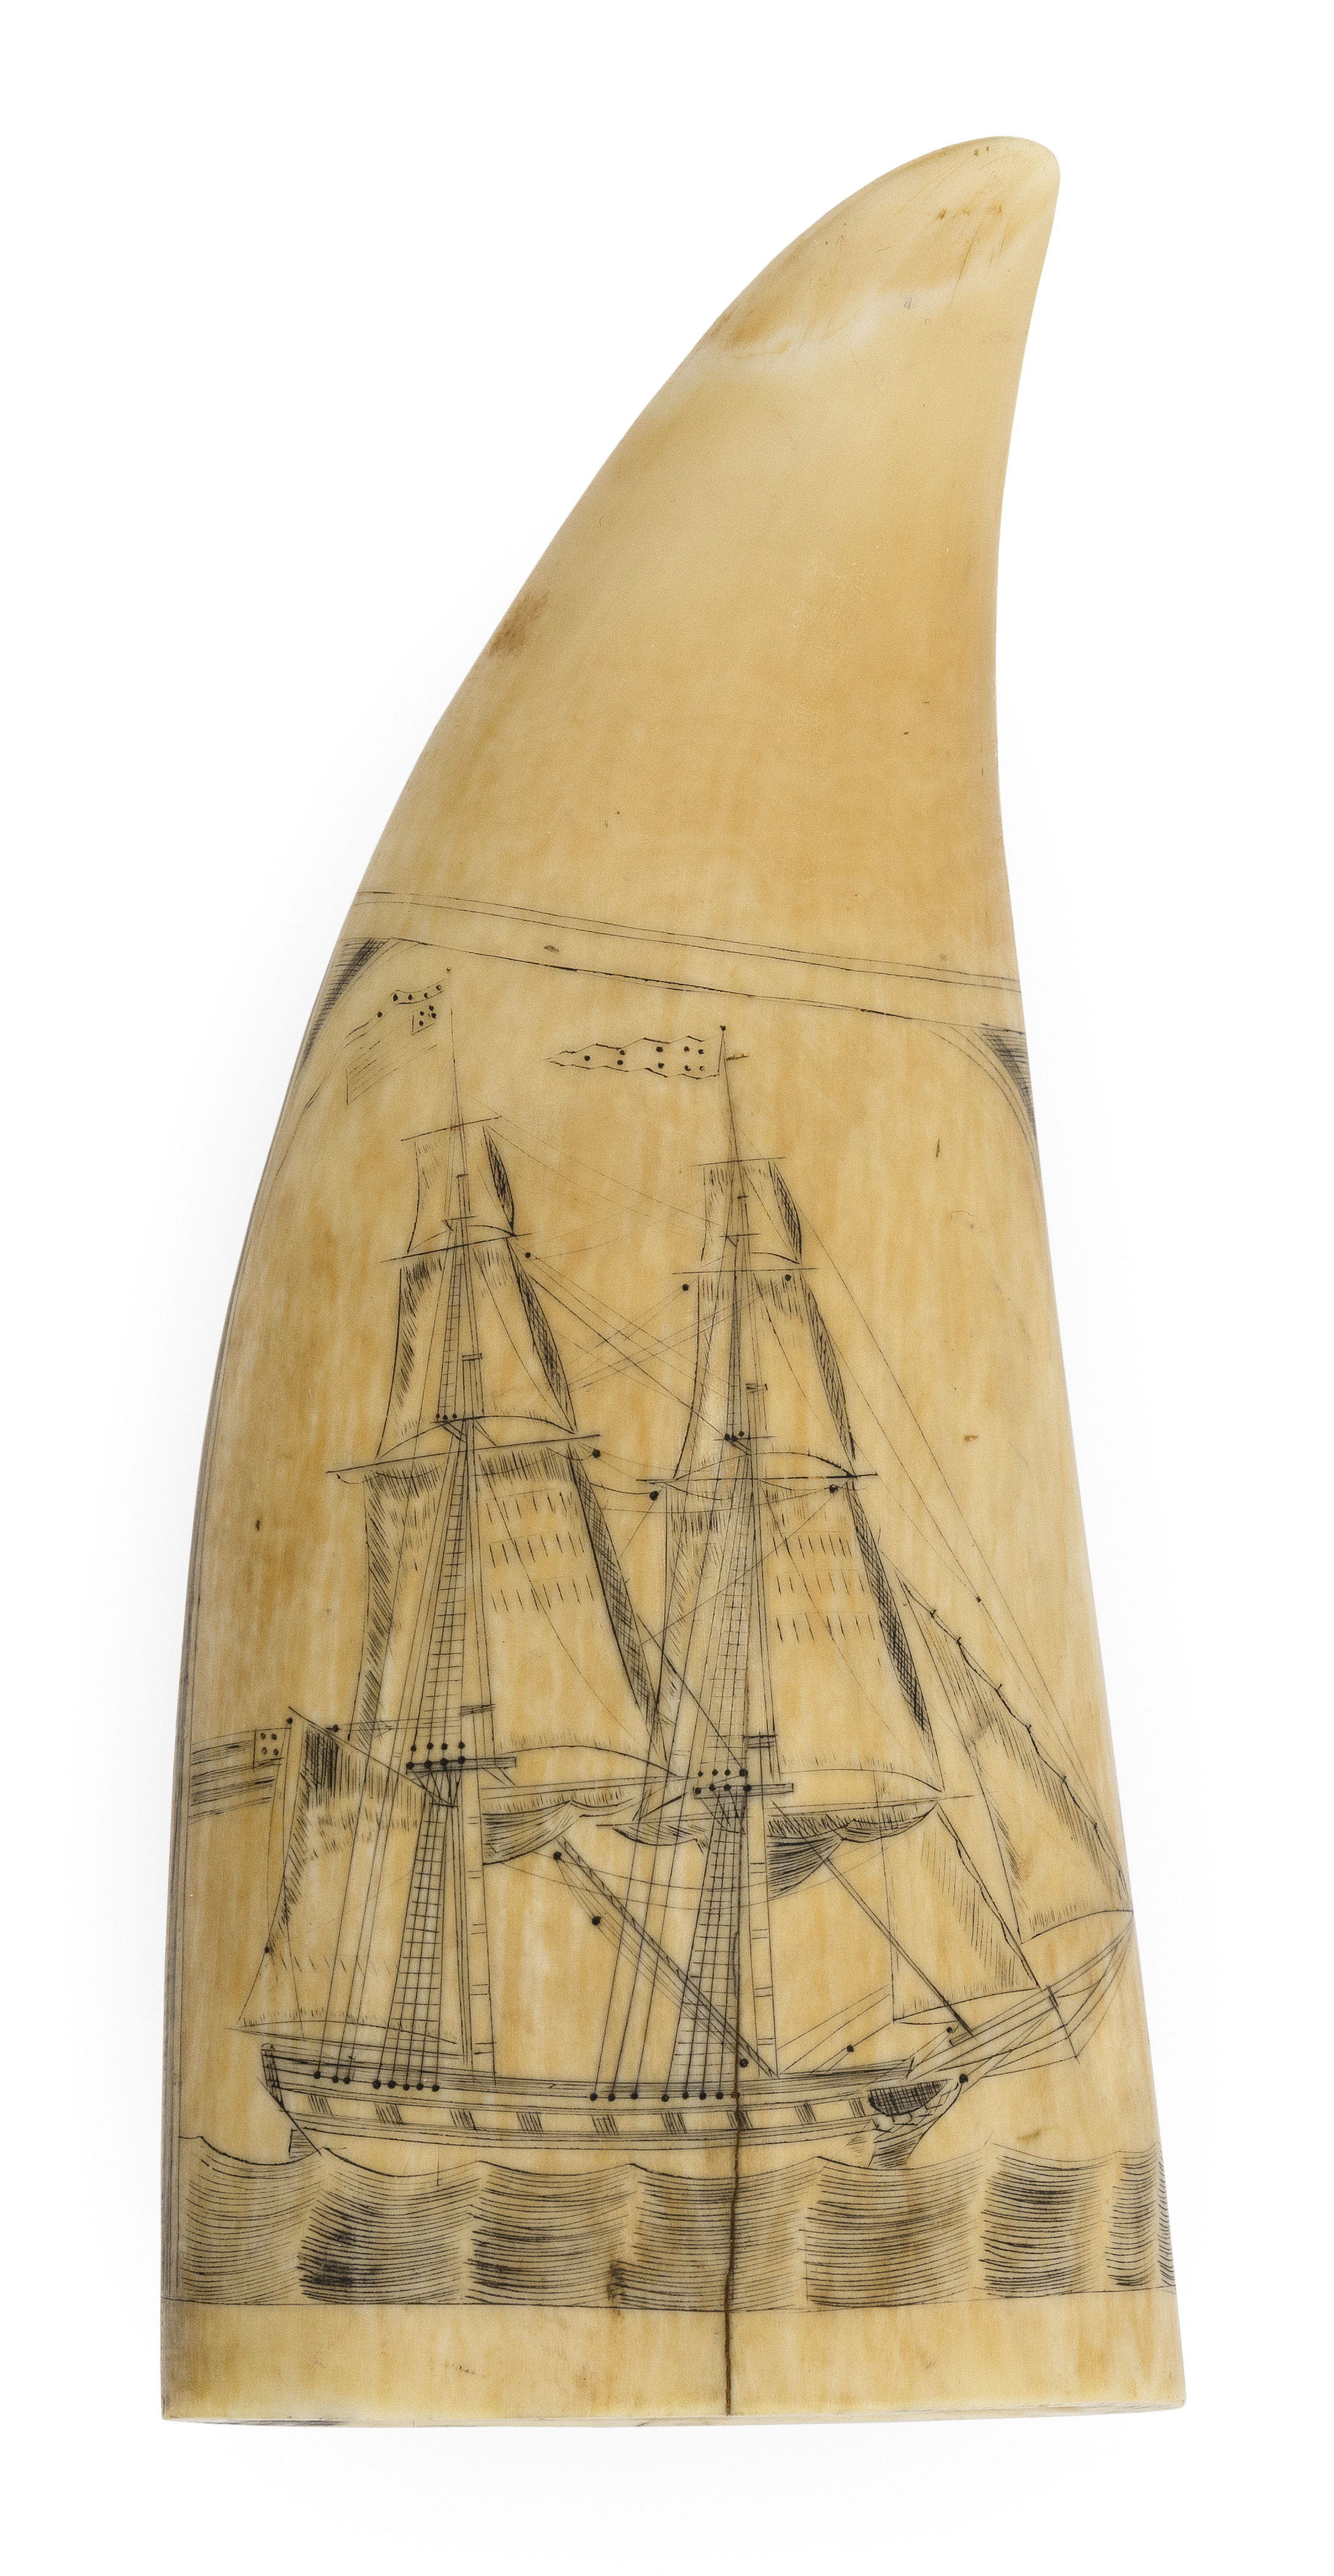 Image 1 for SCRIMSHAW WHALE’S TOOTH WITH SHIP PORTRAIT AND MEMORIAL SCENE Circa 1850 Length 5.75